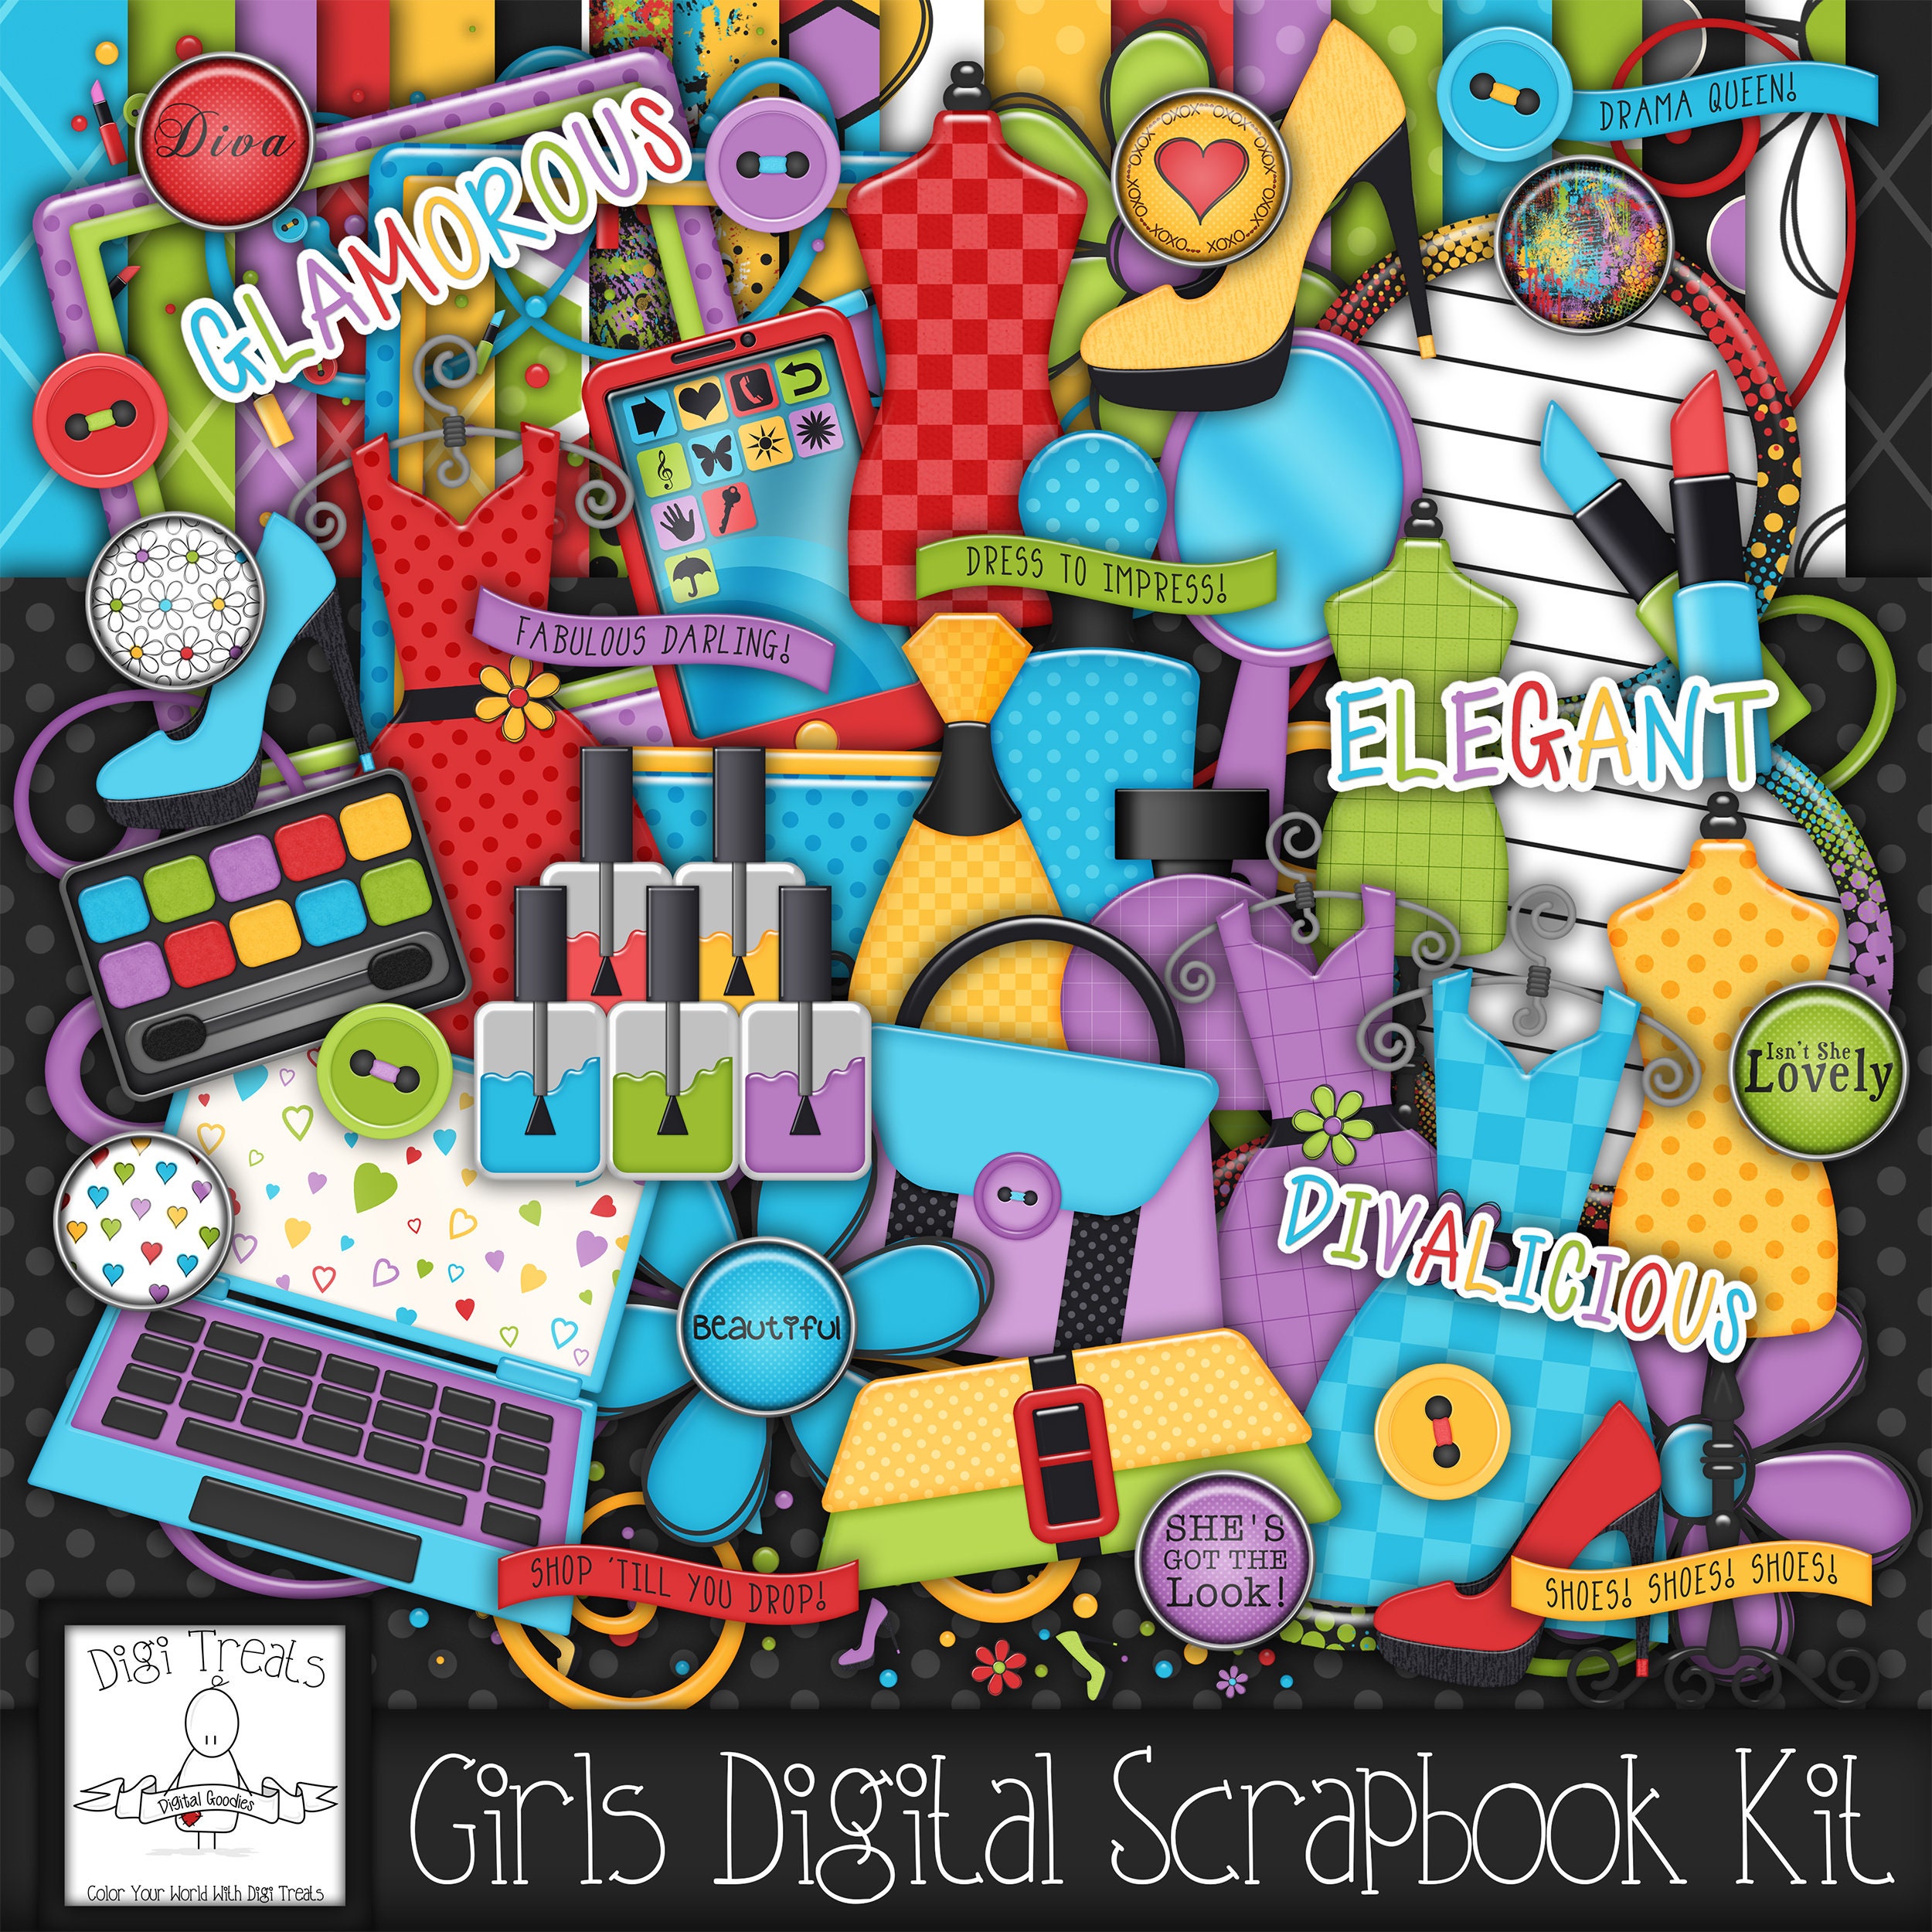 New Girl's Scrapbook Kit Great Activity Gift Squad Goals Girl Power Ages 6+